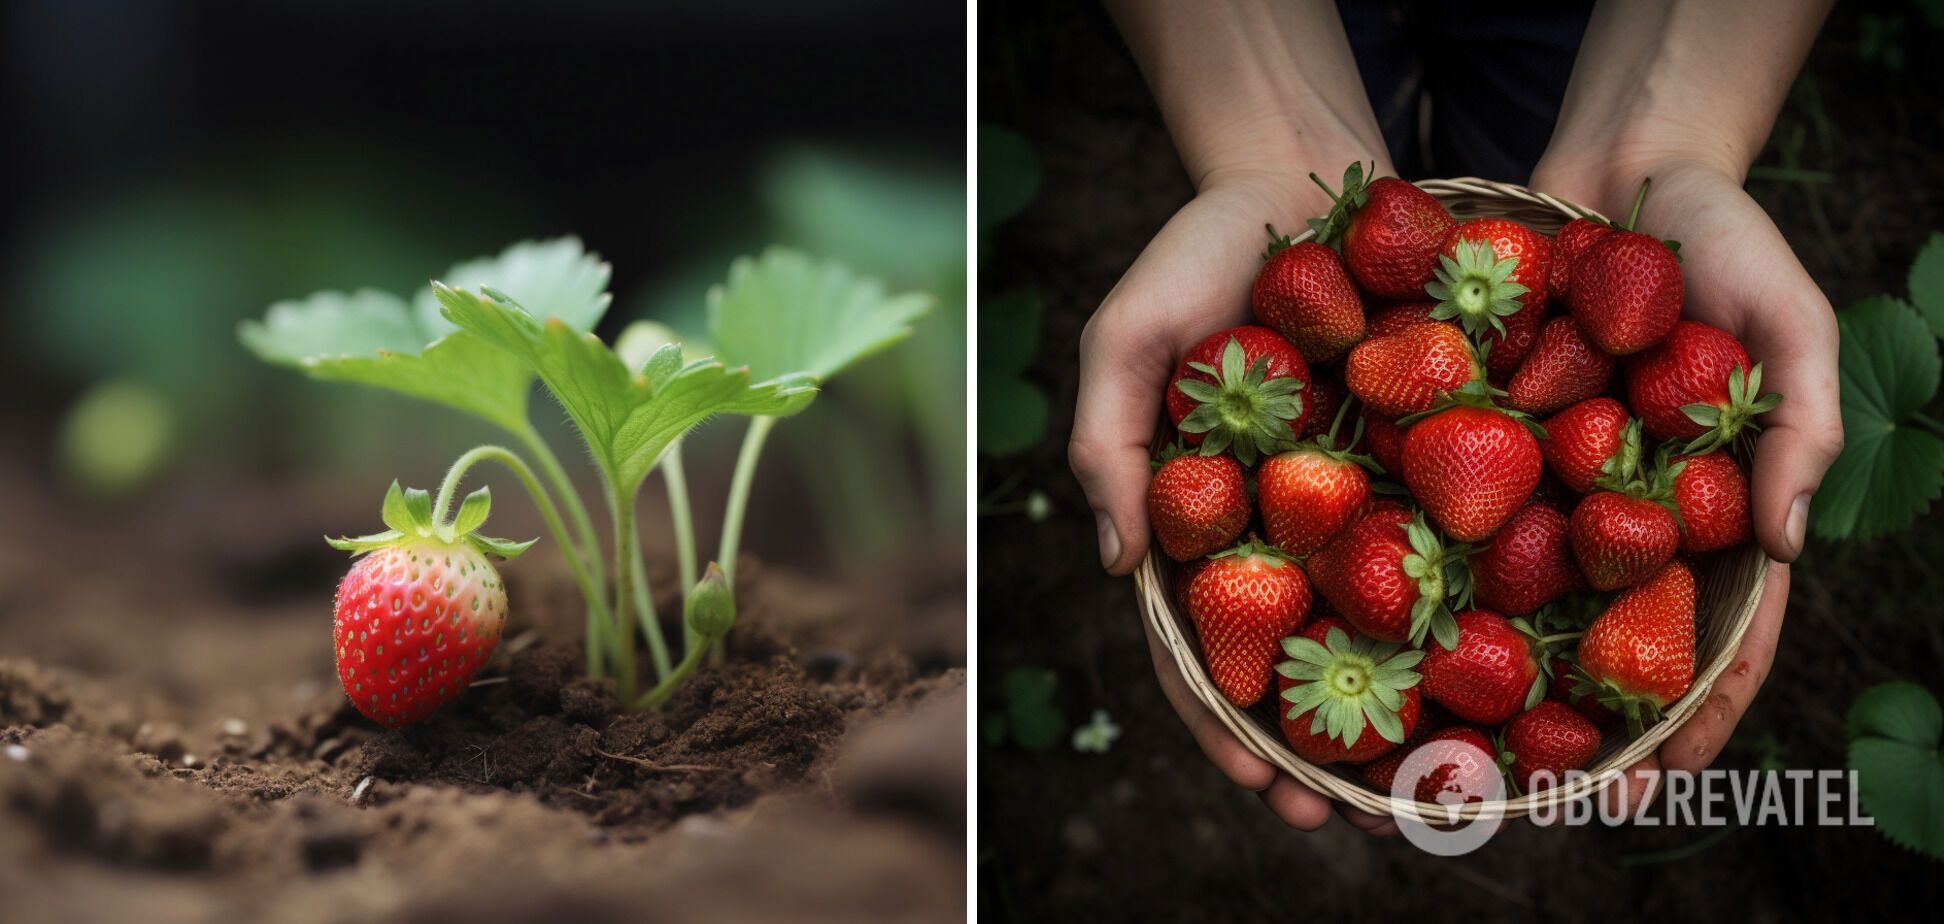 When to transplant strawberries to get sweet berries